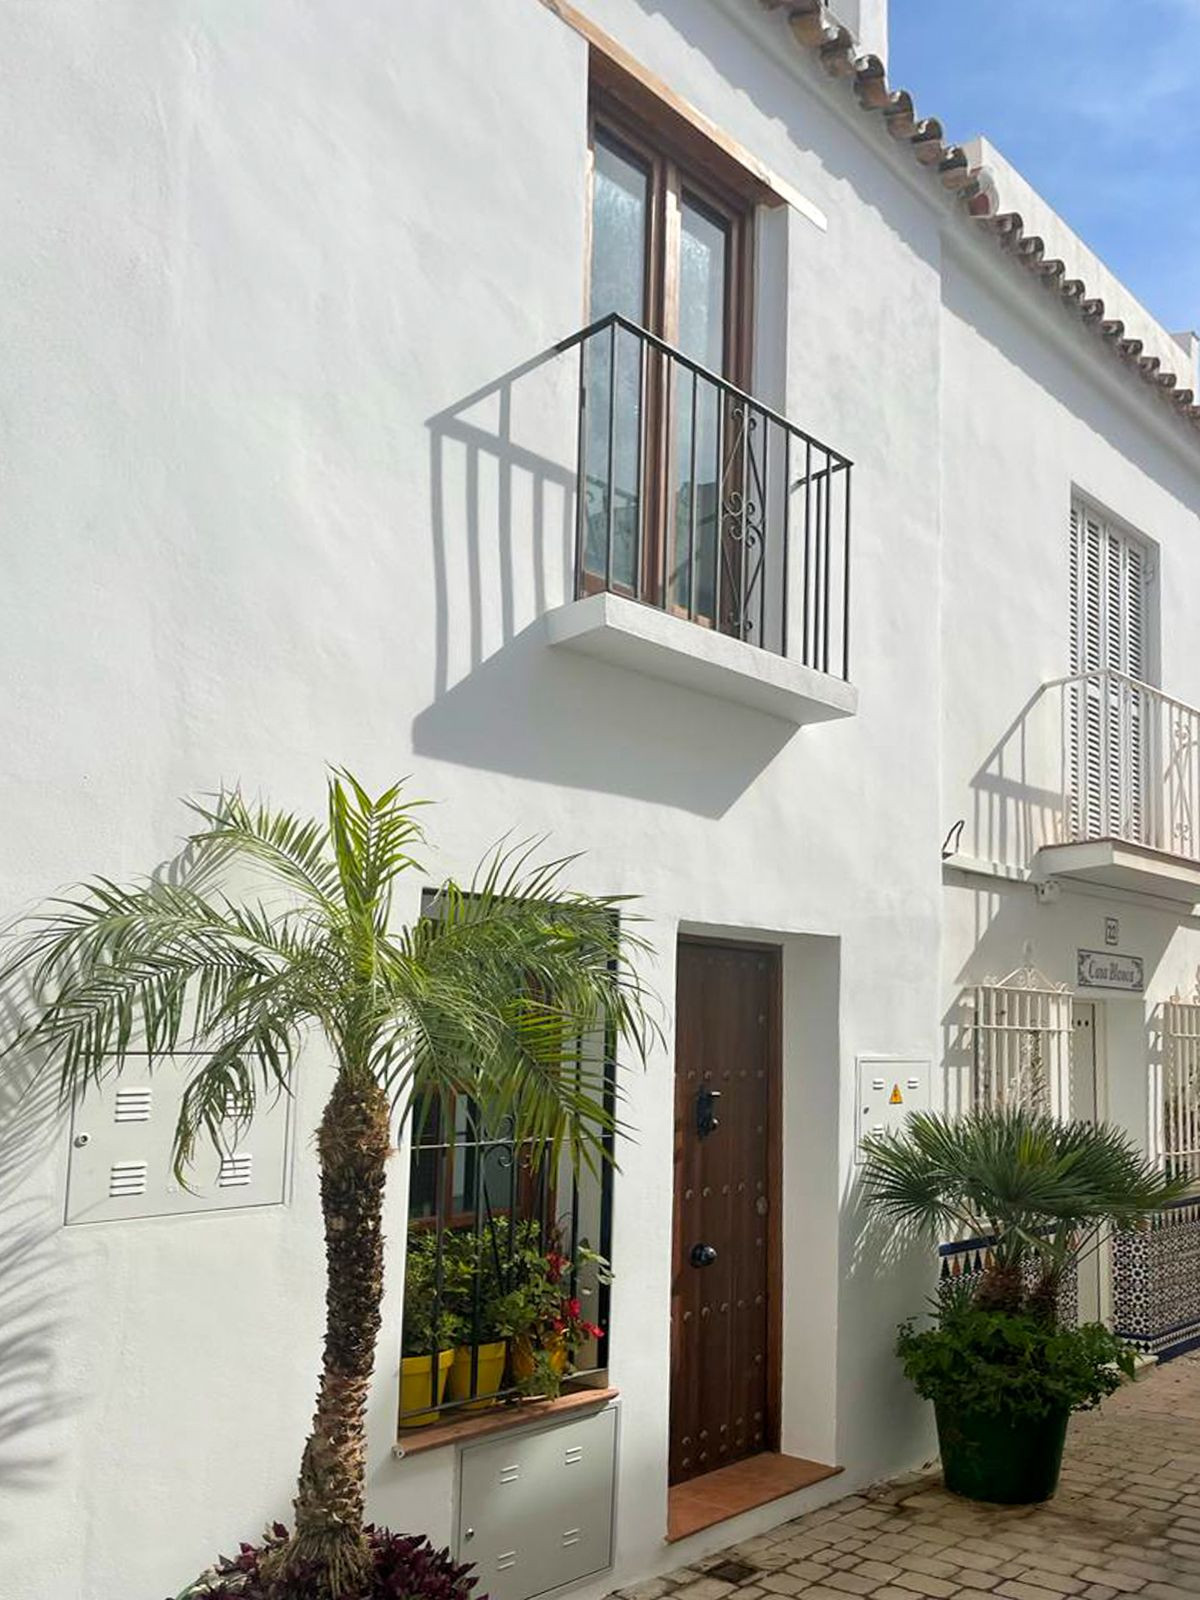  Townhouse, Terraced  for sale    in Estepona